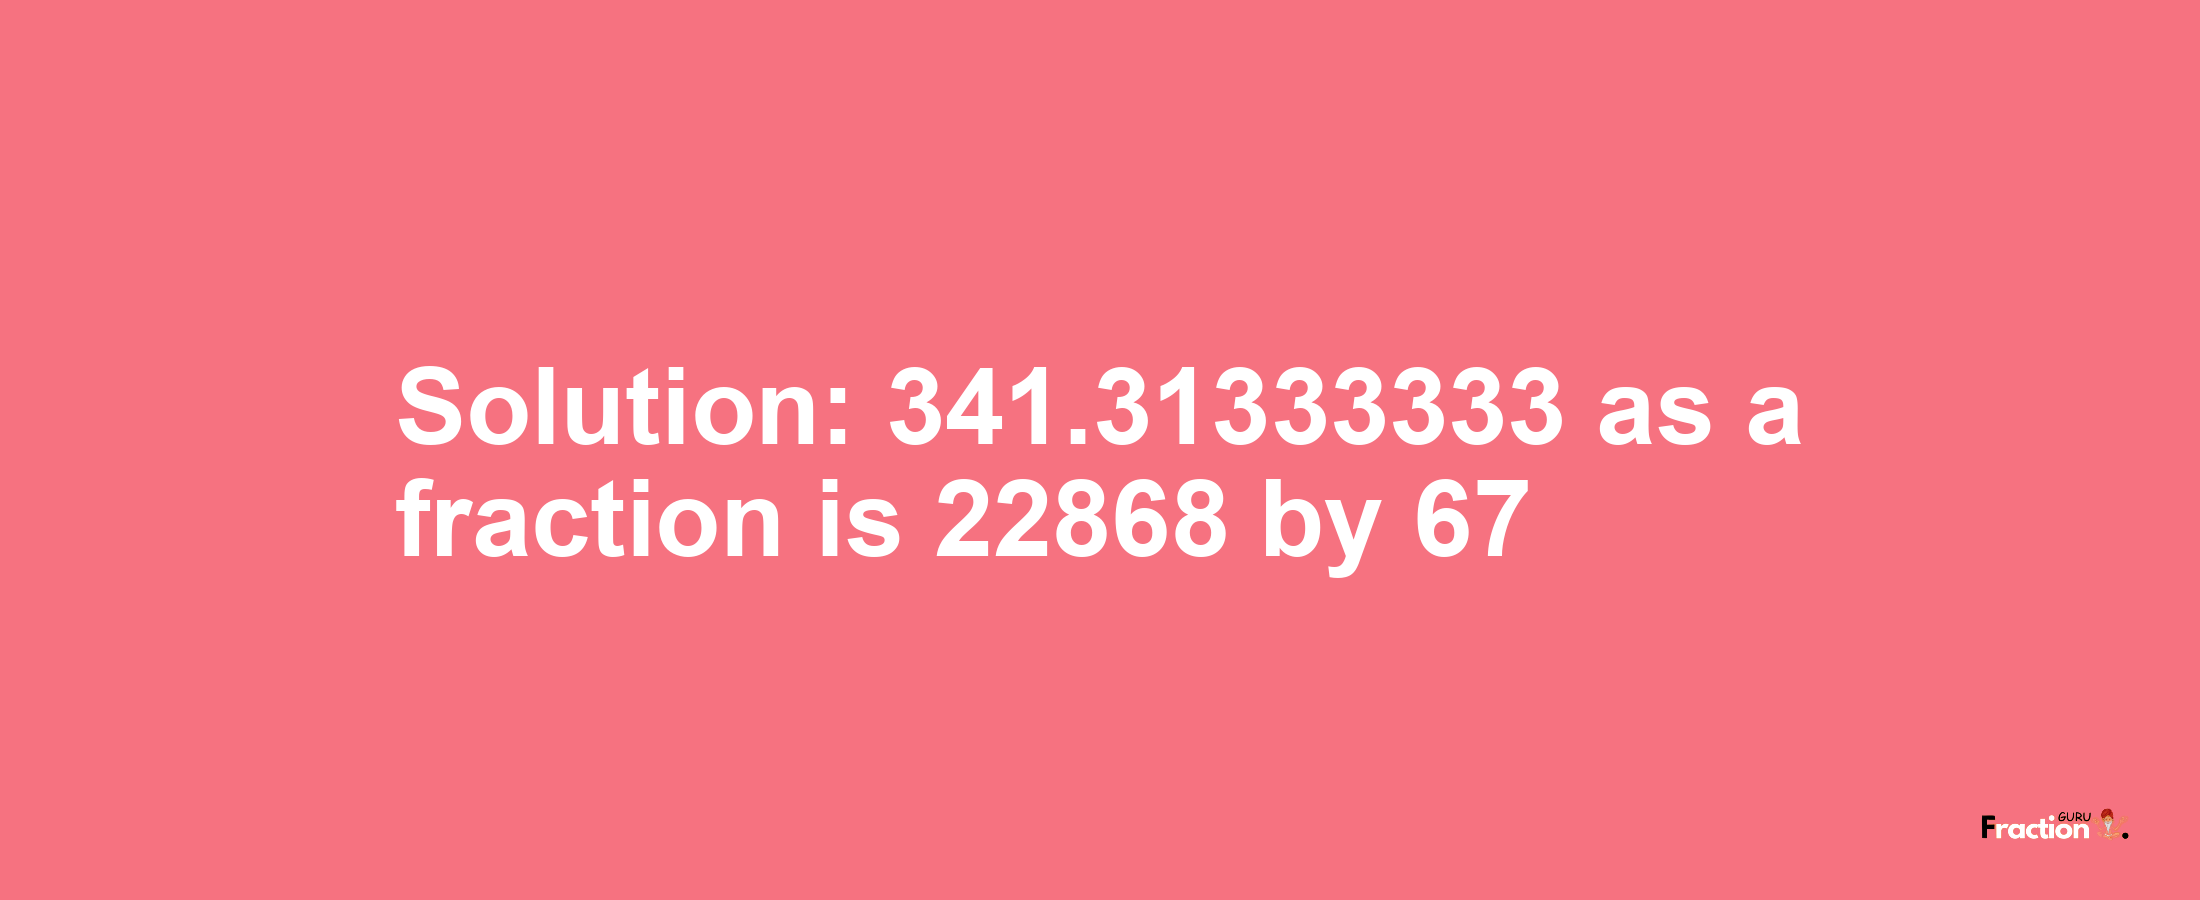 Solution:341.31333333 as a fraction is 22868/67